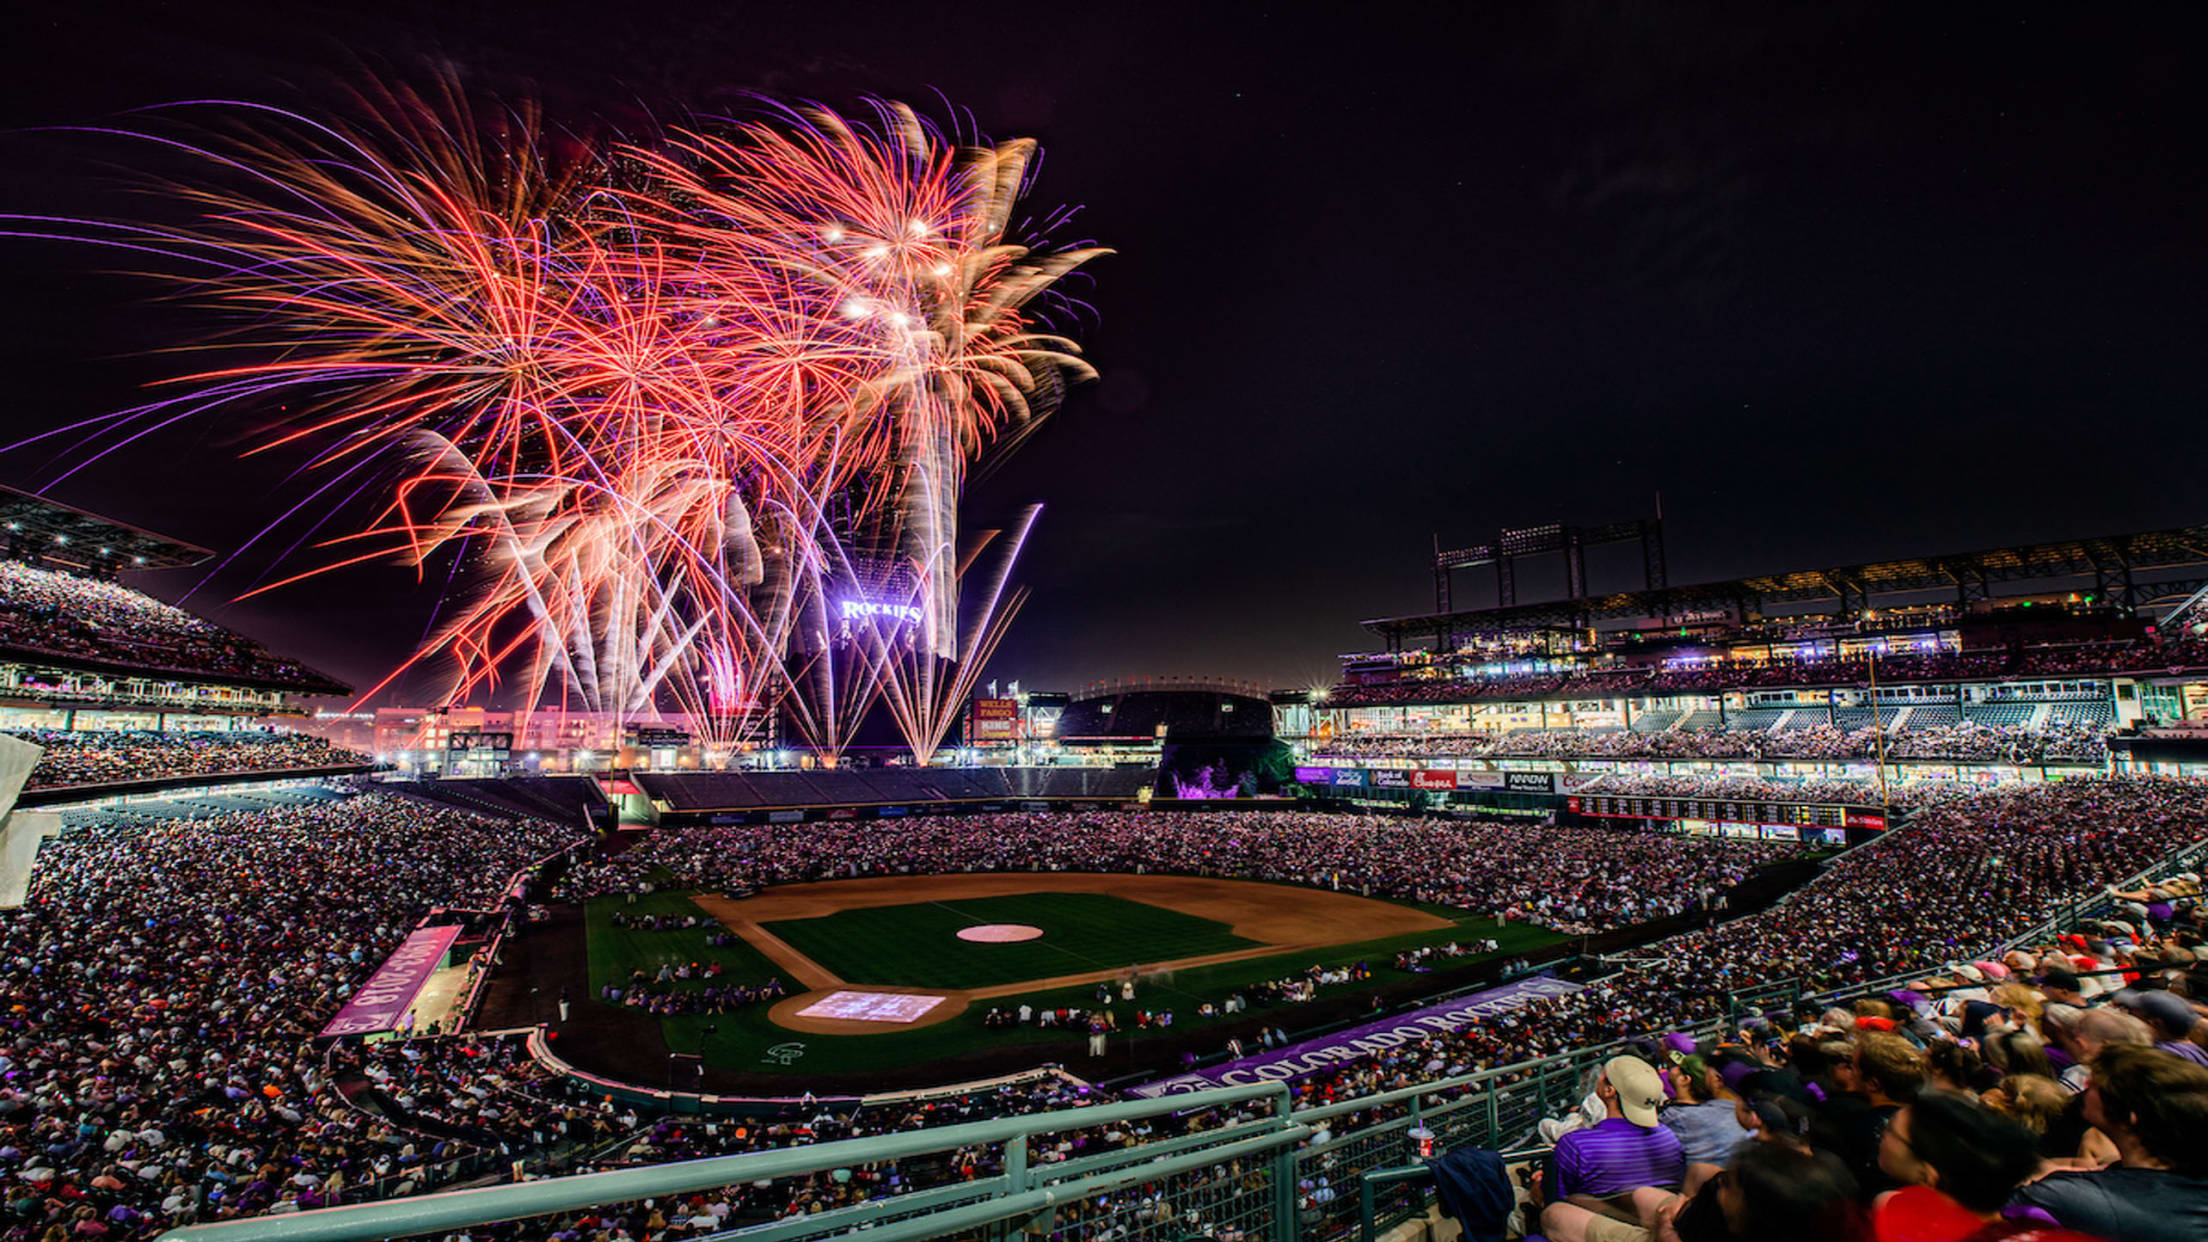 Colorado Rockies passion runs deeper for fans than fireworks and